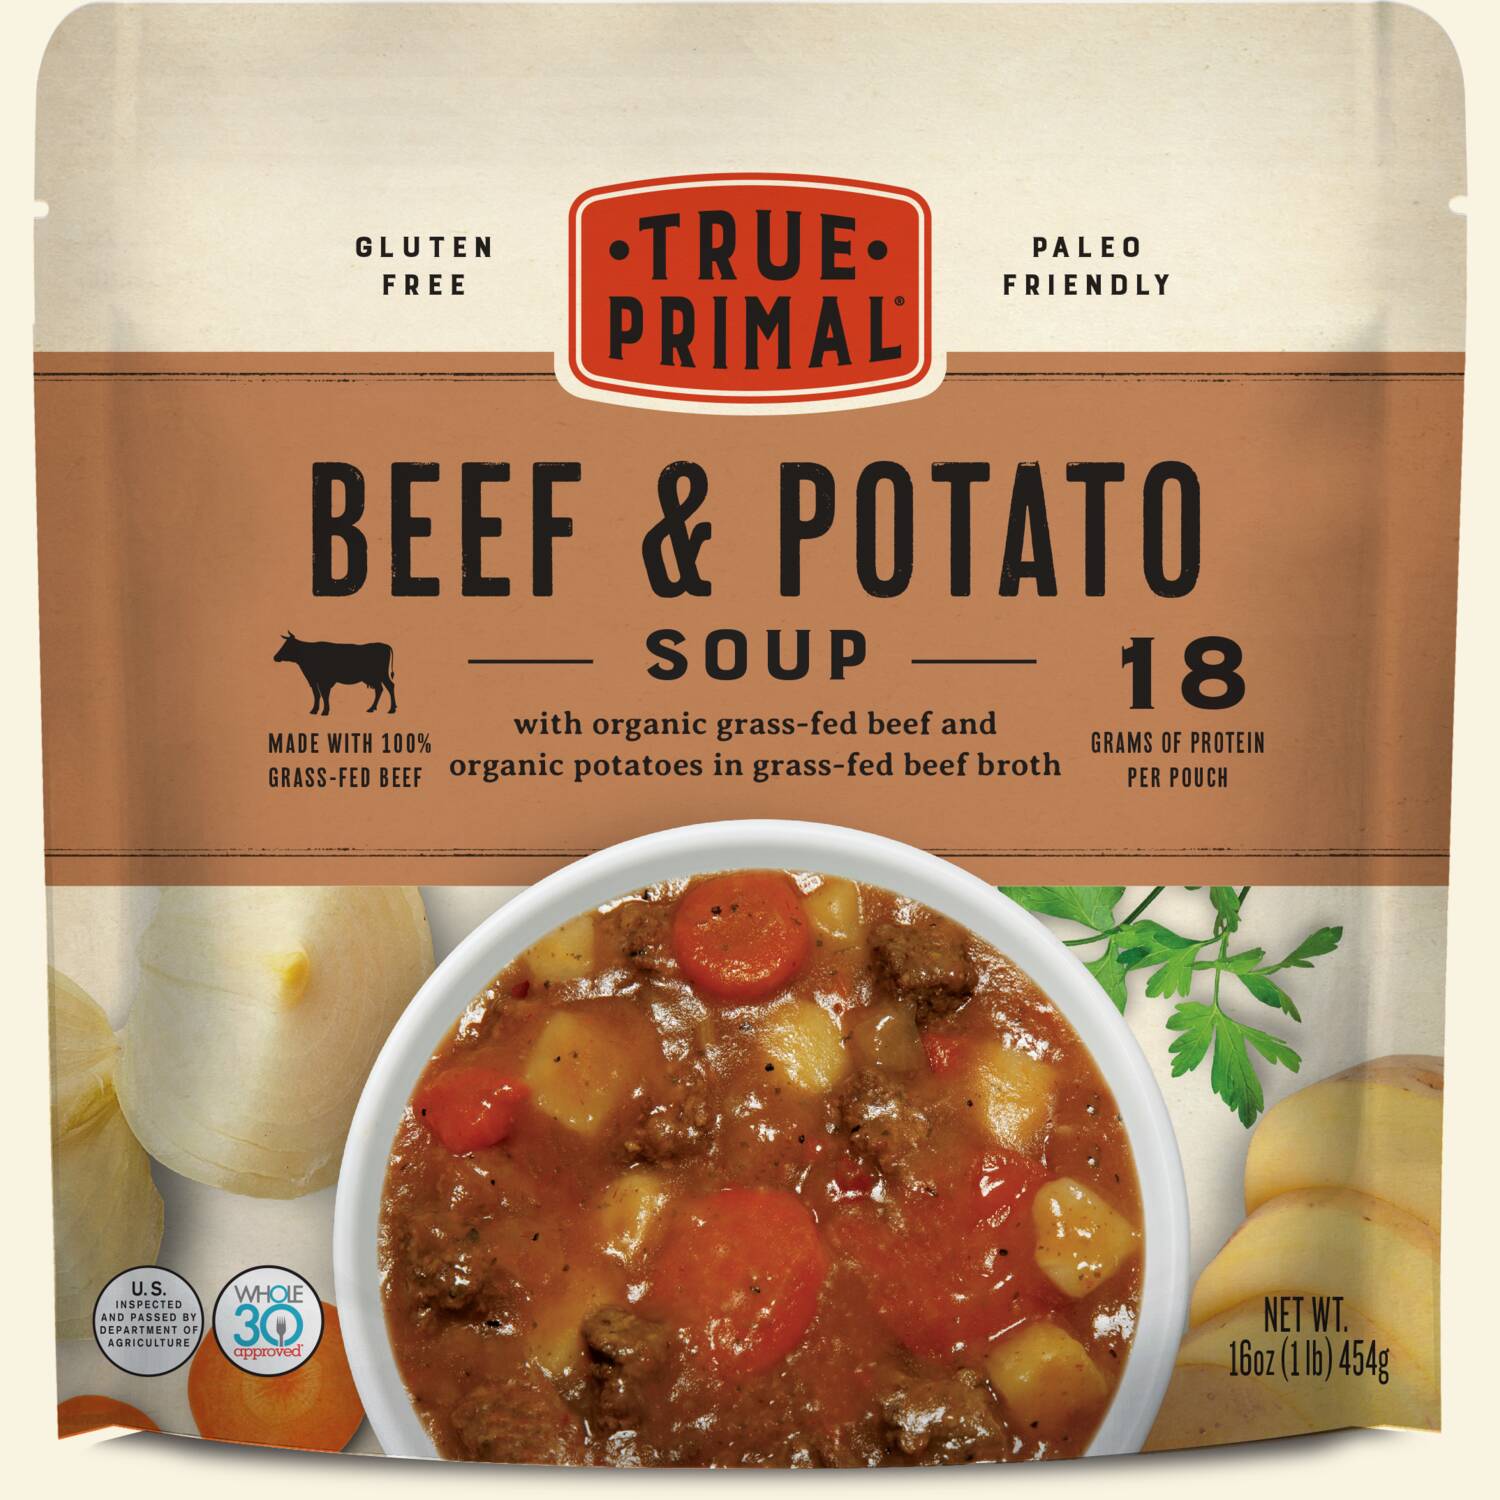 True Primal Beef & Potato Soup in pouch, front